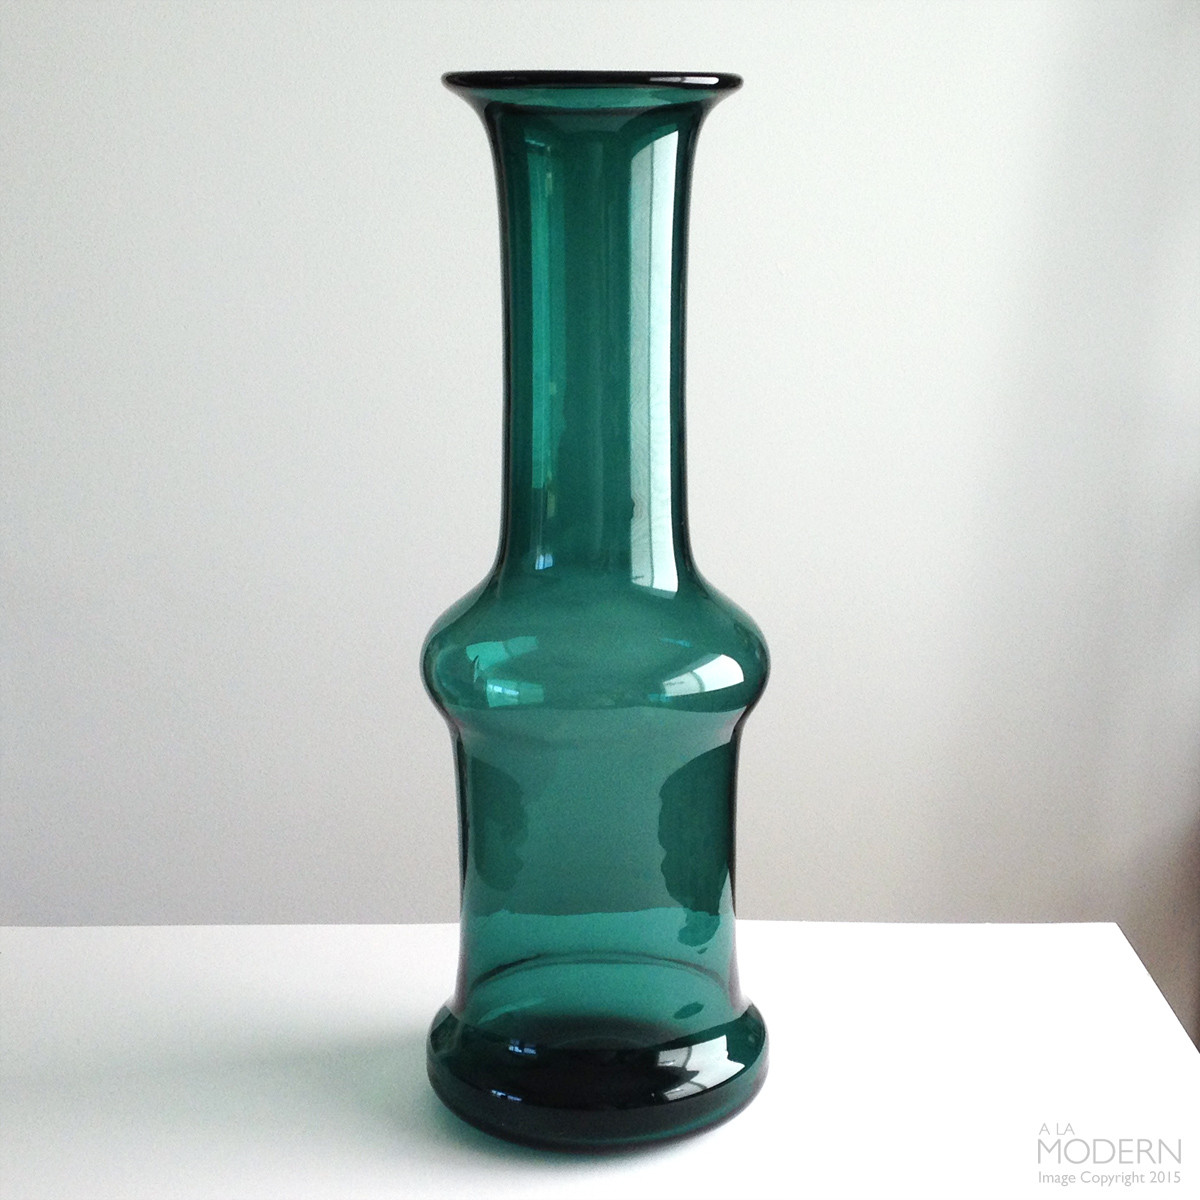 Blenko Vase Shapes Of Blenko Glass Tall No 5717 Juniper Architectural Floor Vase Wayne with A Monumental Rare Blenko Glass Tall Architectural Cylindrical Pipe Vase Designed by Wayne Husted In 1957 This is A Showstopper Of A Piece Almost 2 Feet